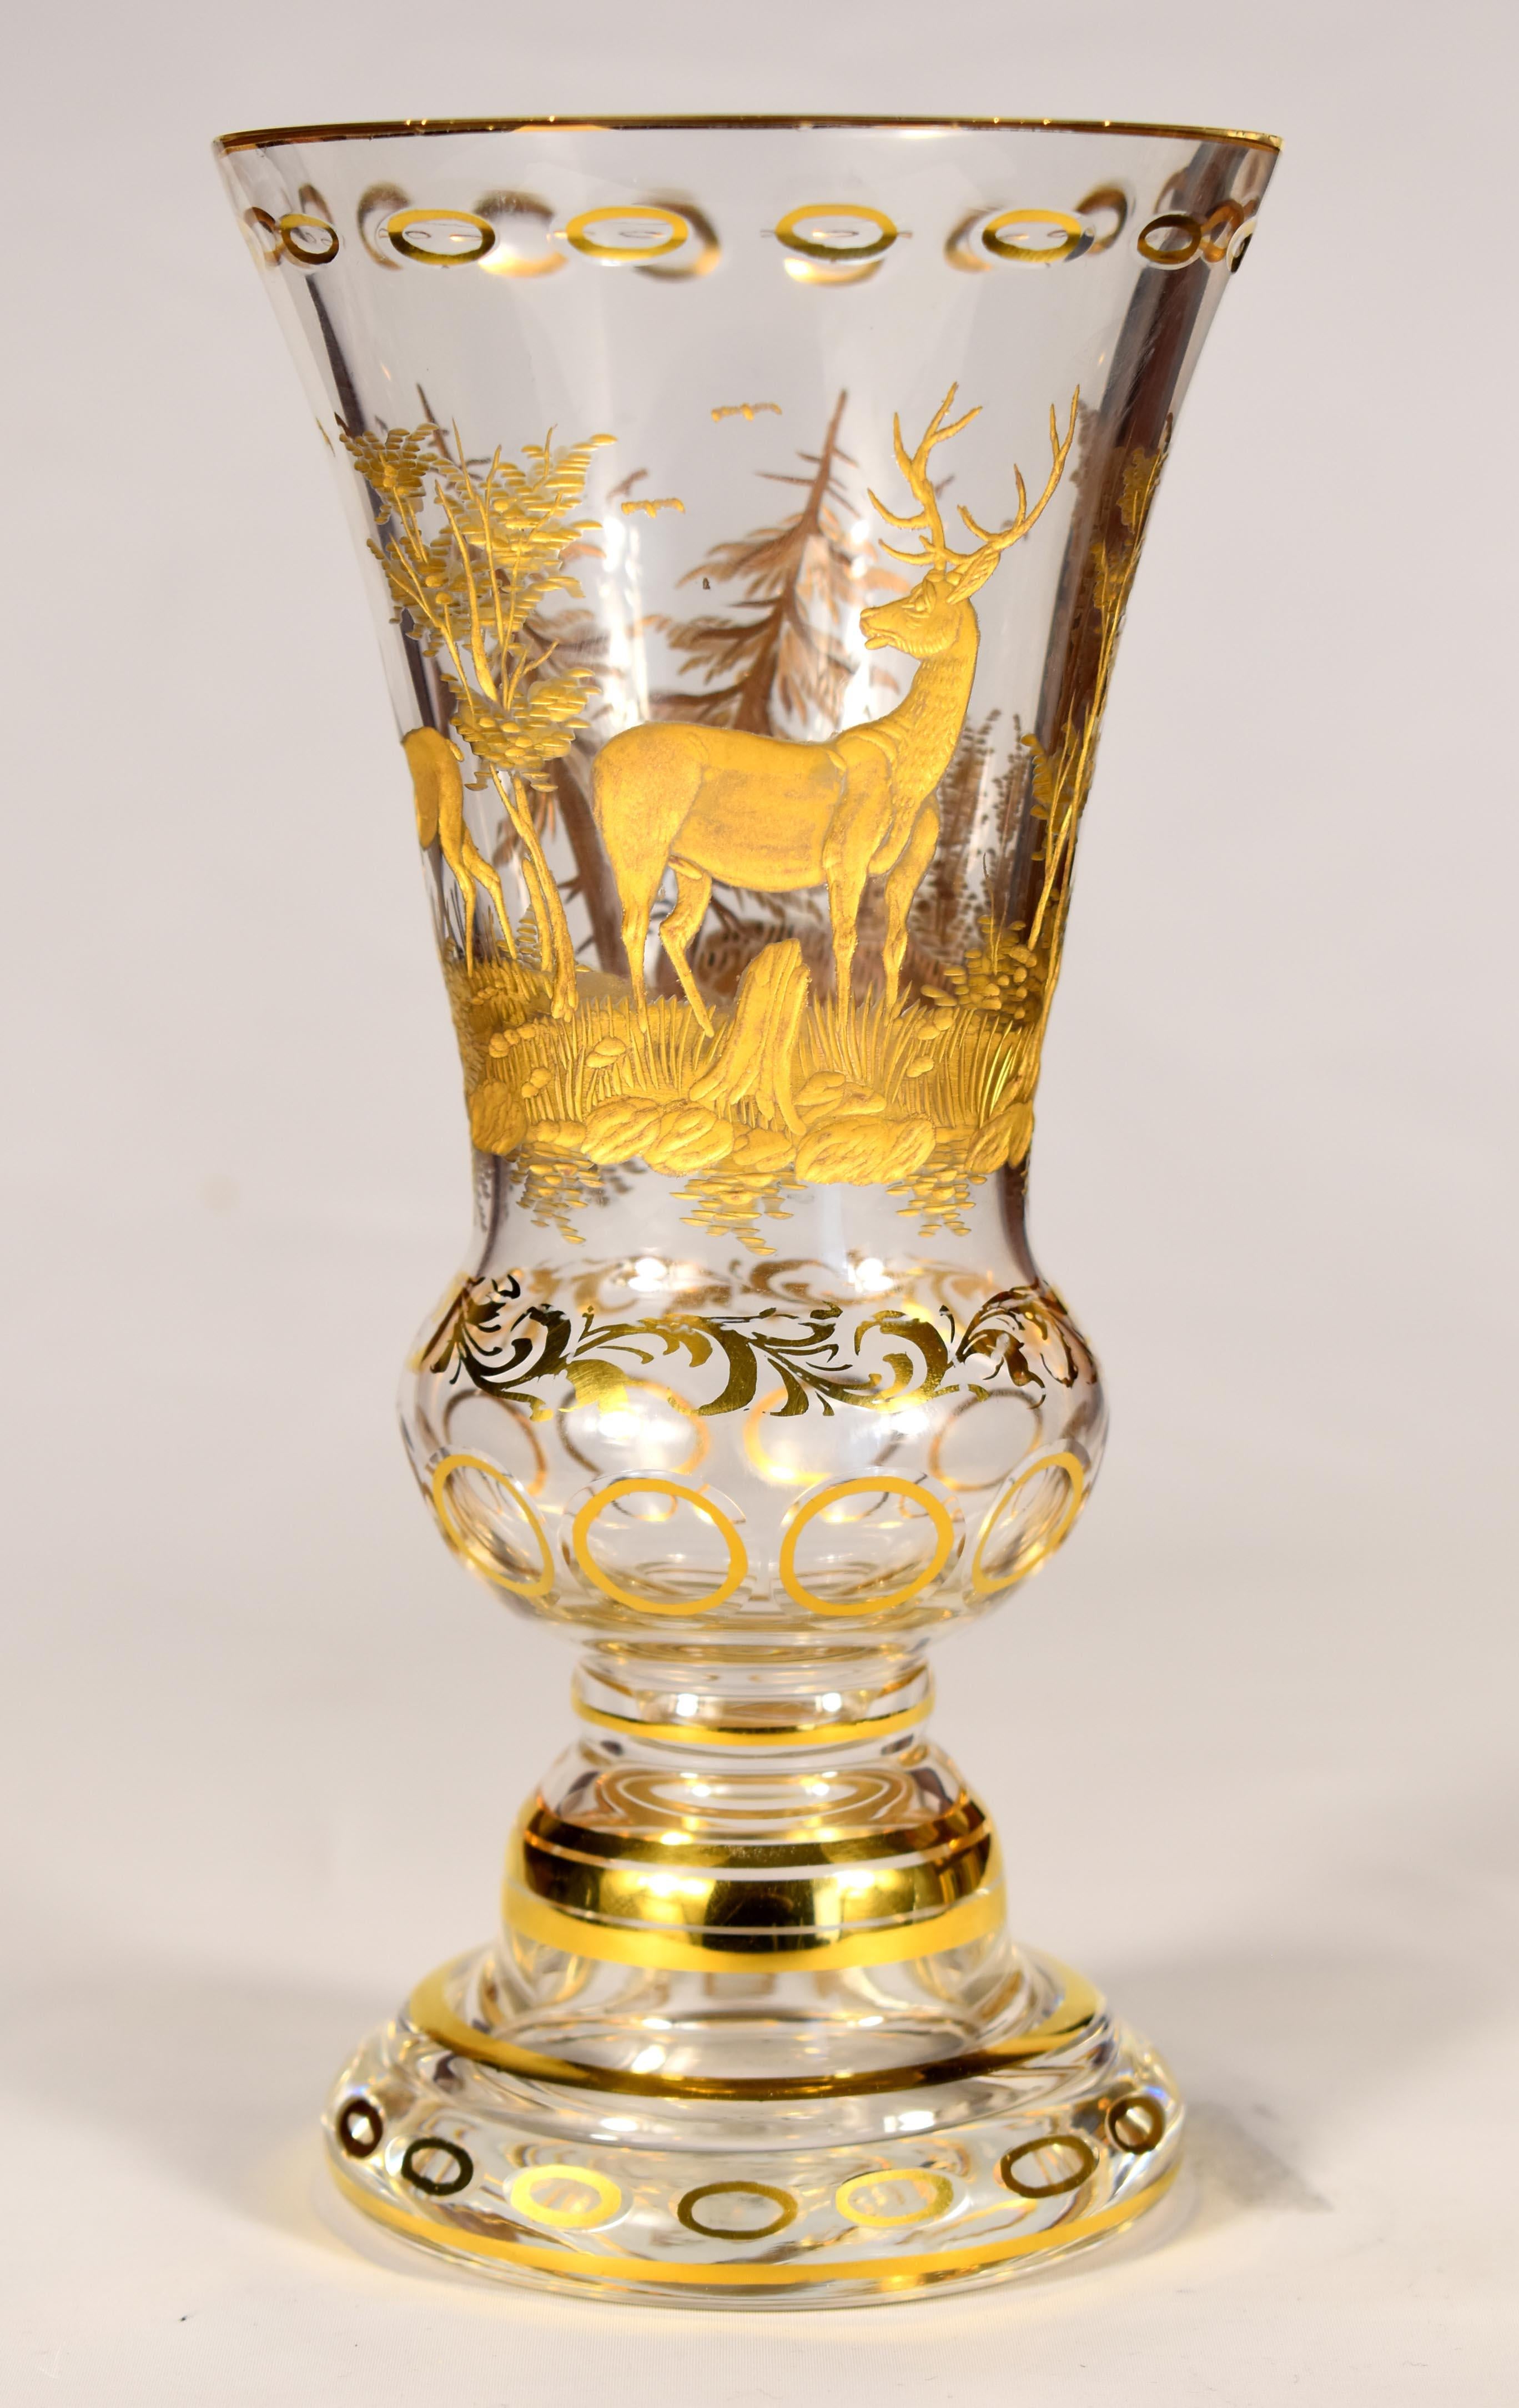 Hand-Crafted Gilded Vase + Two Gilded Glasses - Hunting motif. 20th century For Sale